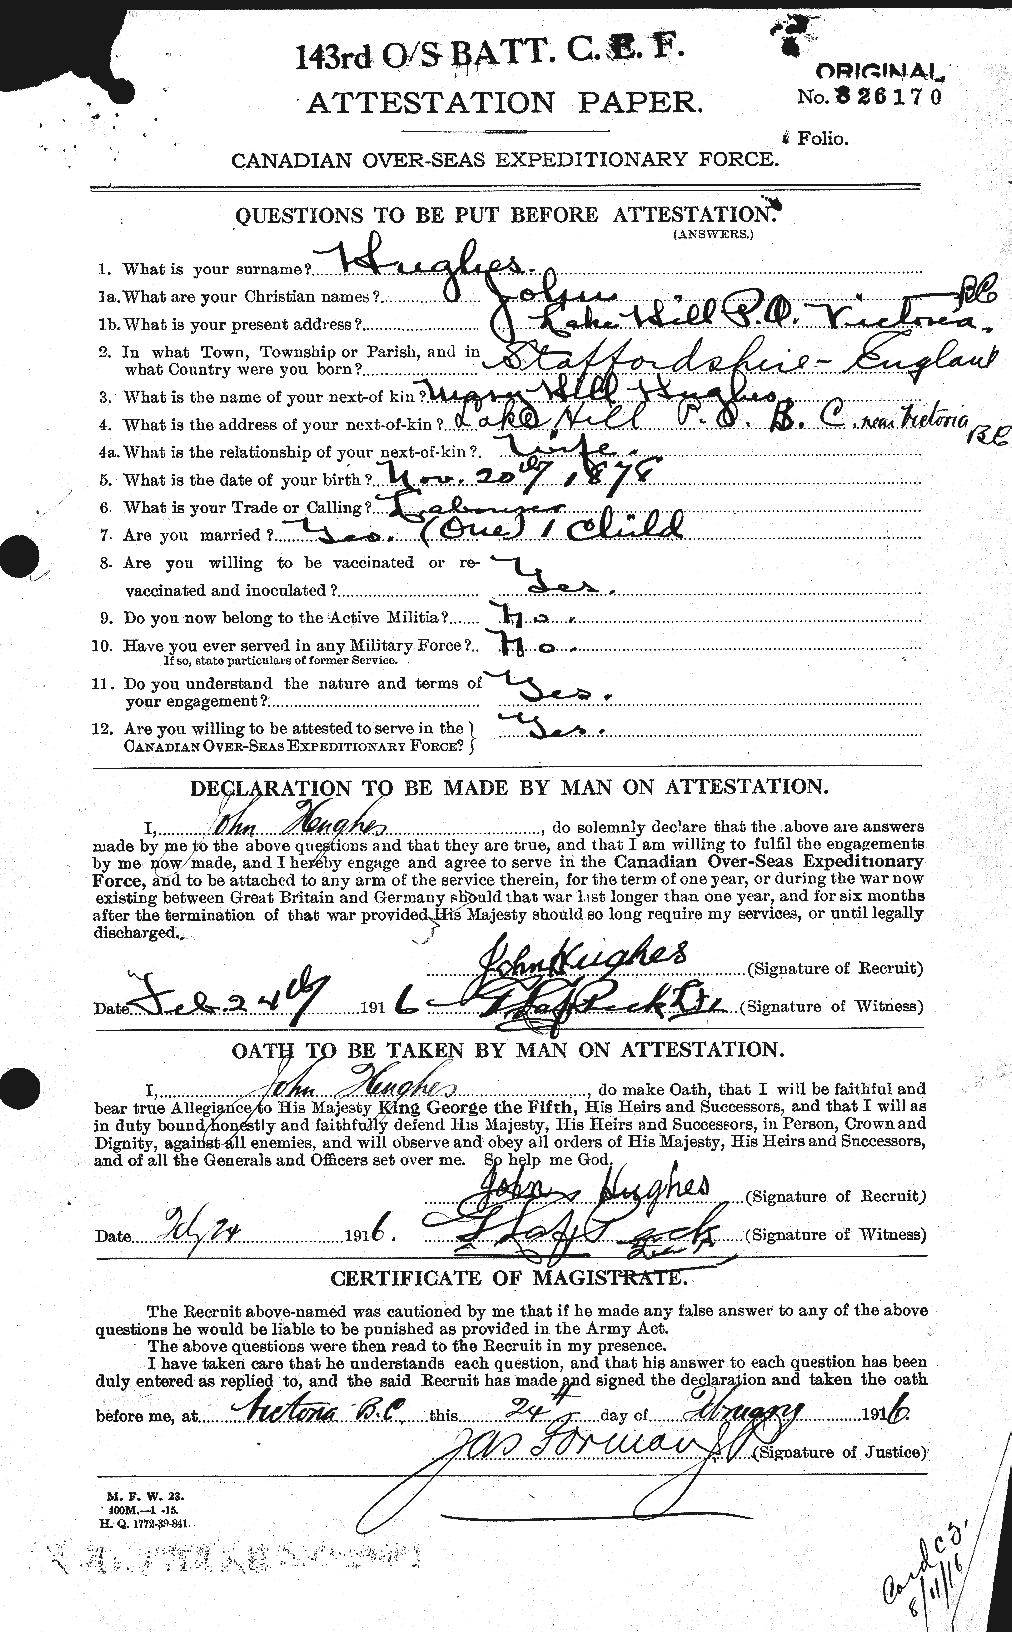 Personnel Records of the First World War - CEF 403981a